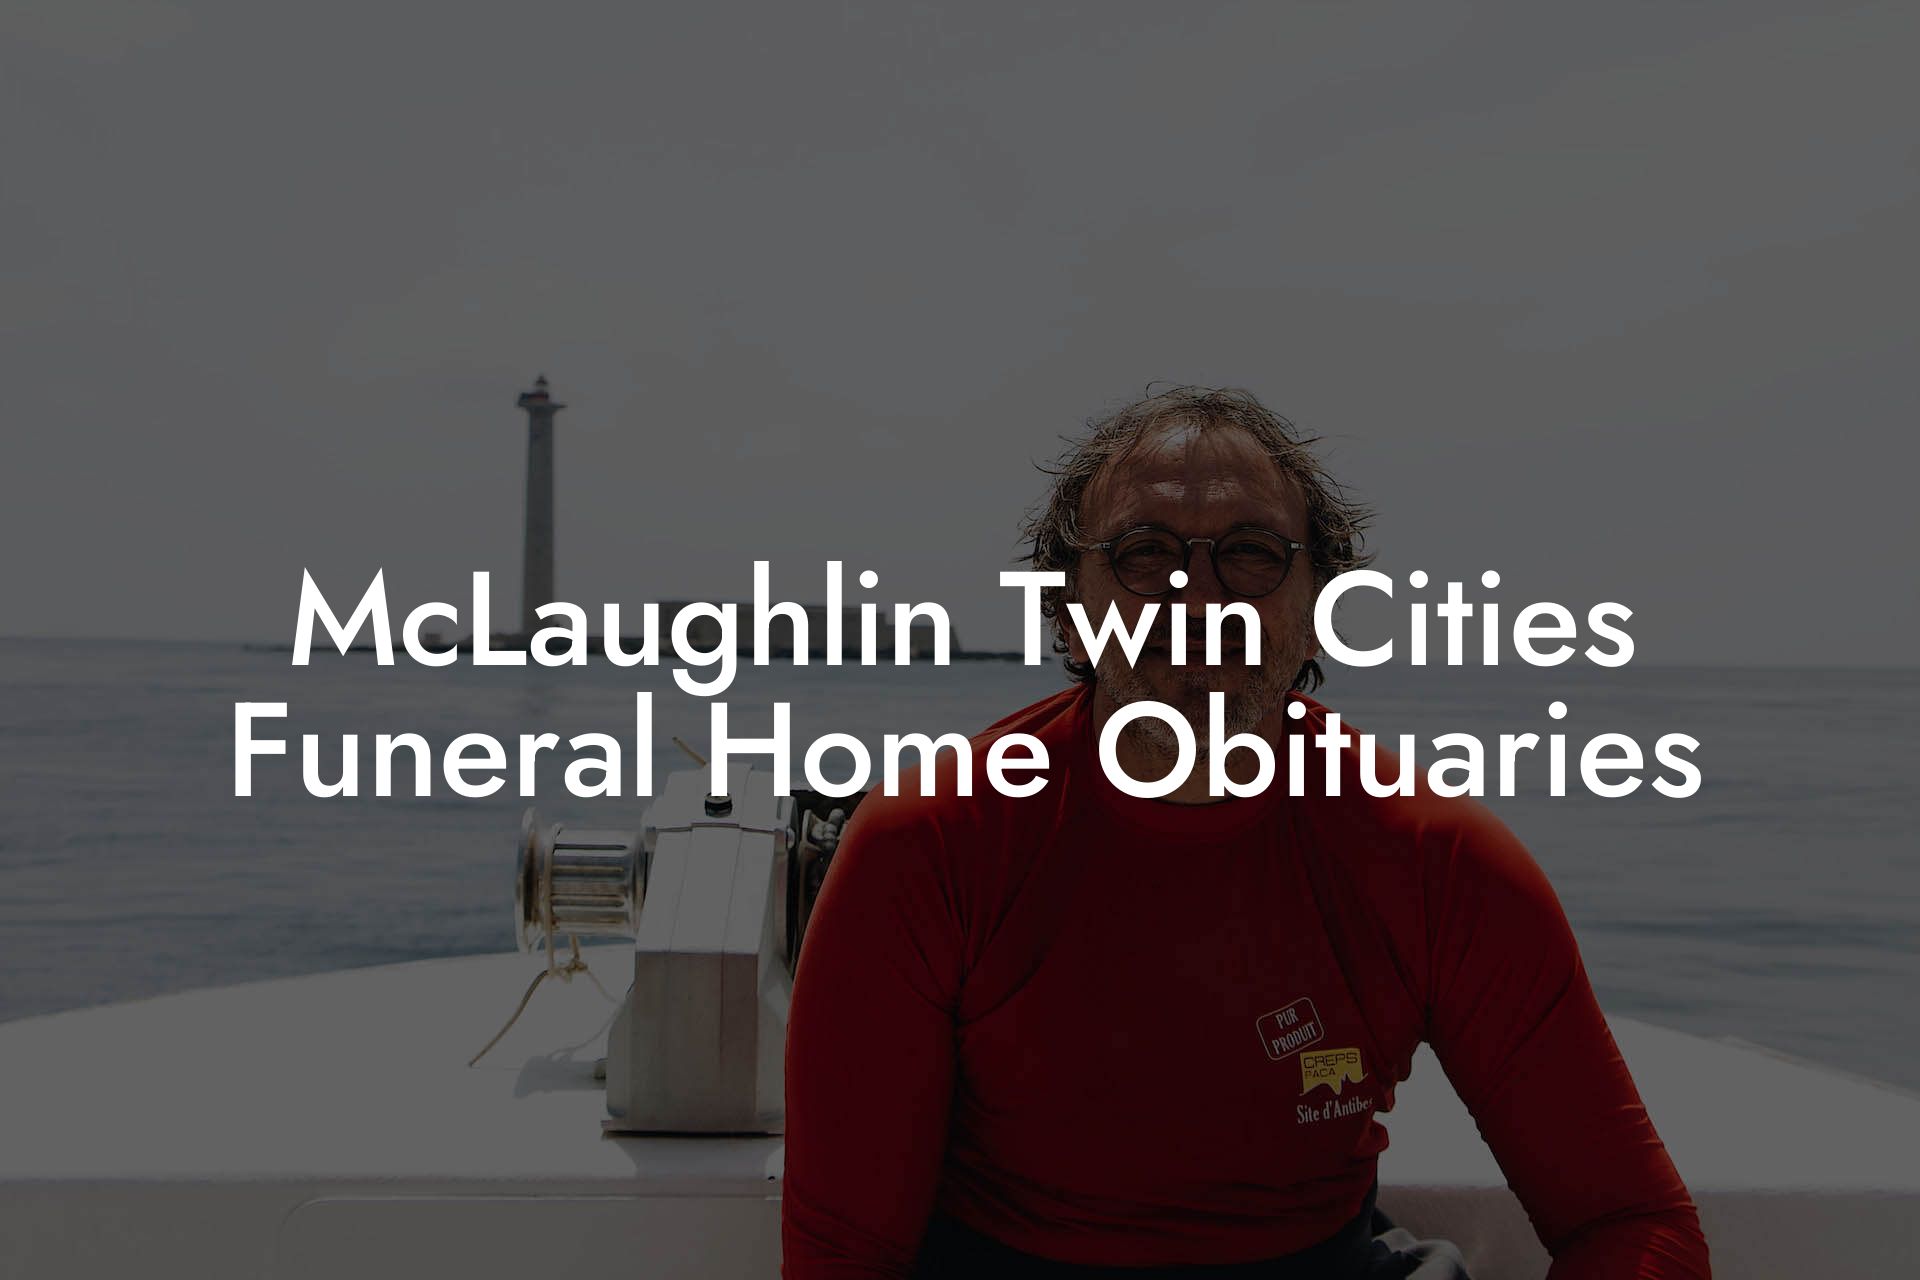 McLaughlin Twin Cities Funeral Home Obituaries